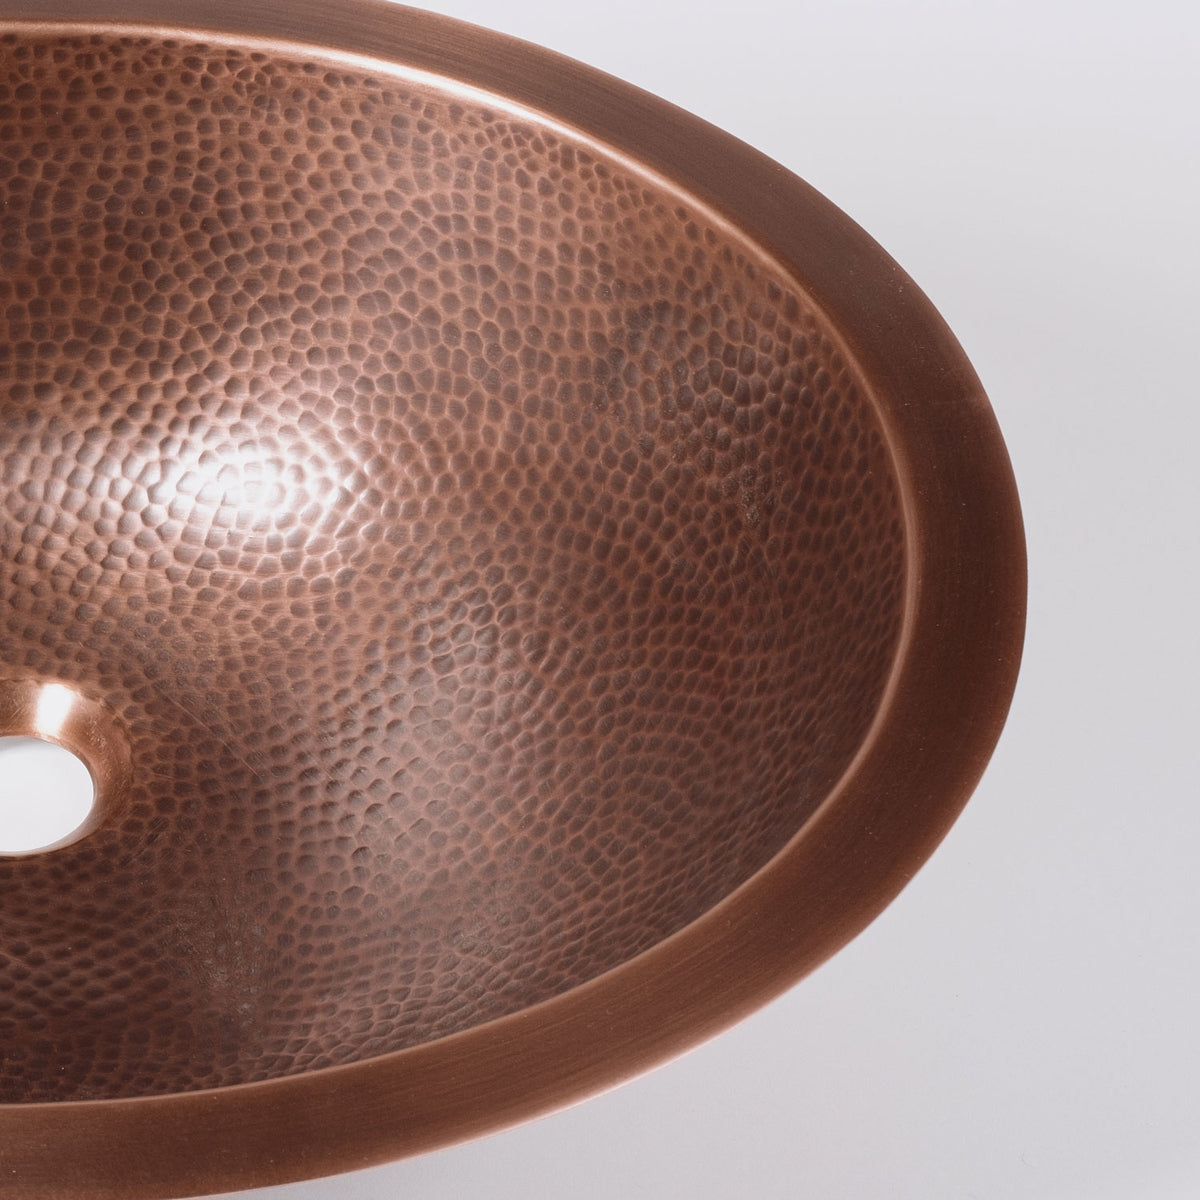 Oval Self-rimming Copper Sink image 4 of 4